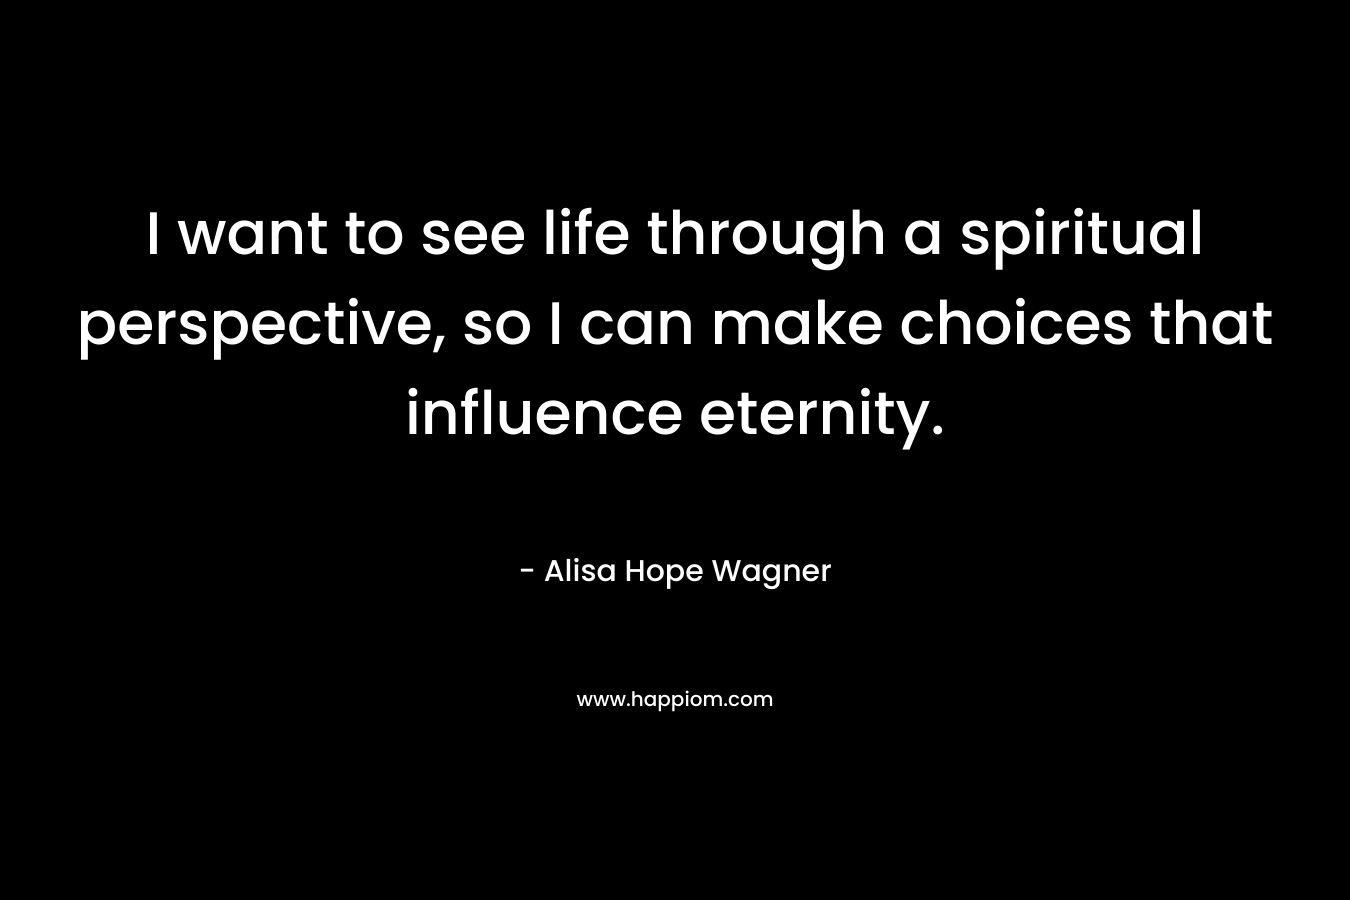 I want to see life through a spiritual perspective, so I can make choices that influence eternity.